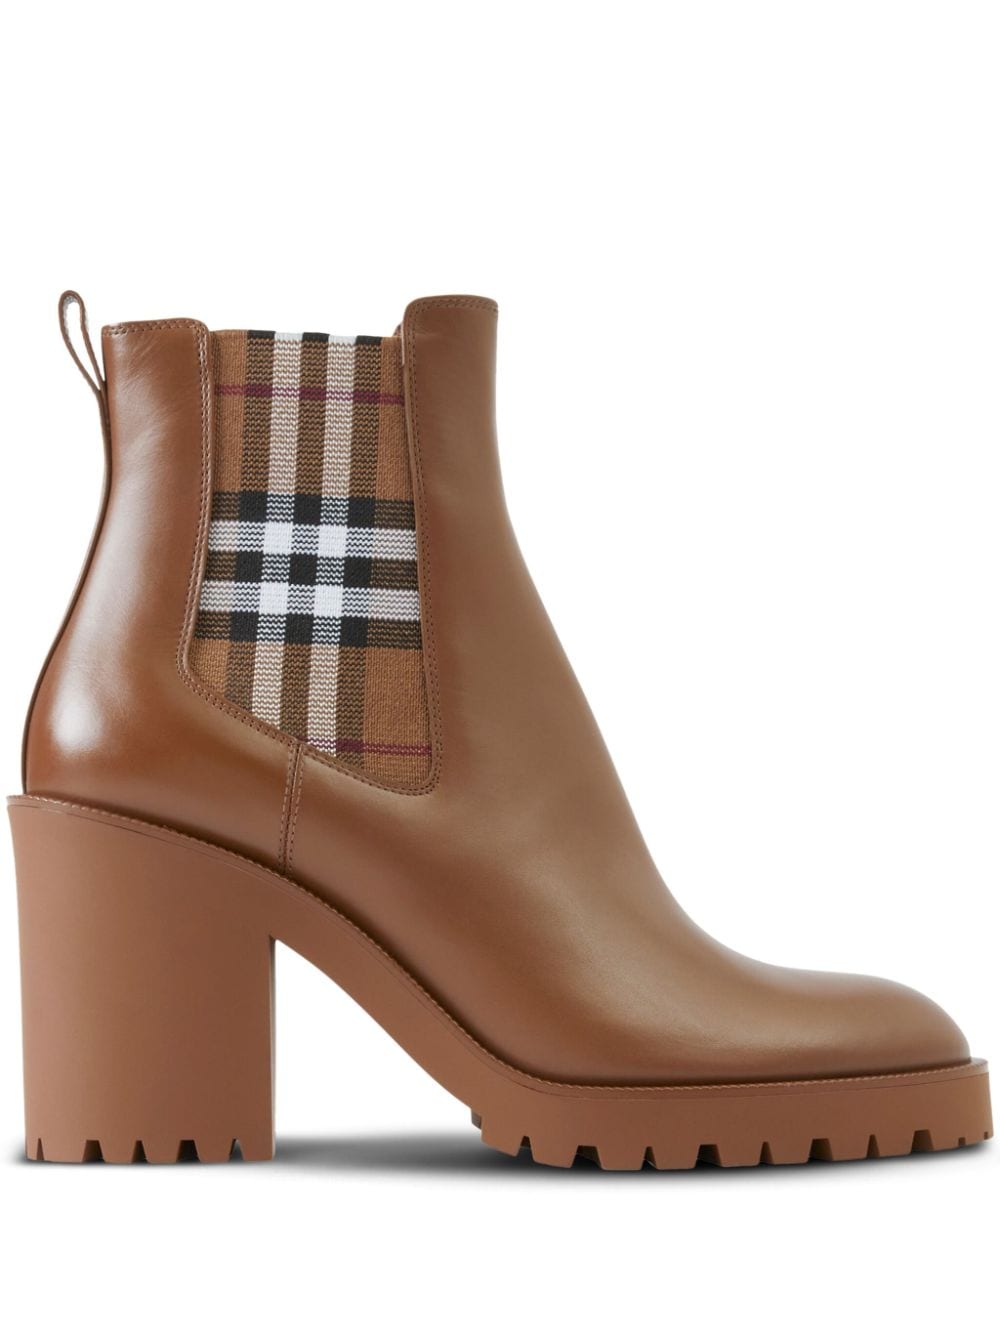 Burberry Check Panel 70mm Leather Ankle Boots - Farfetch